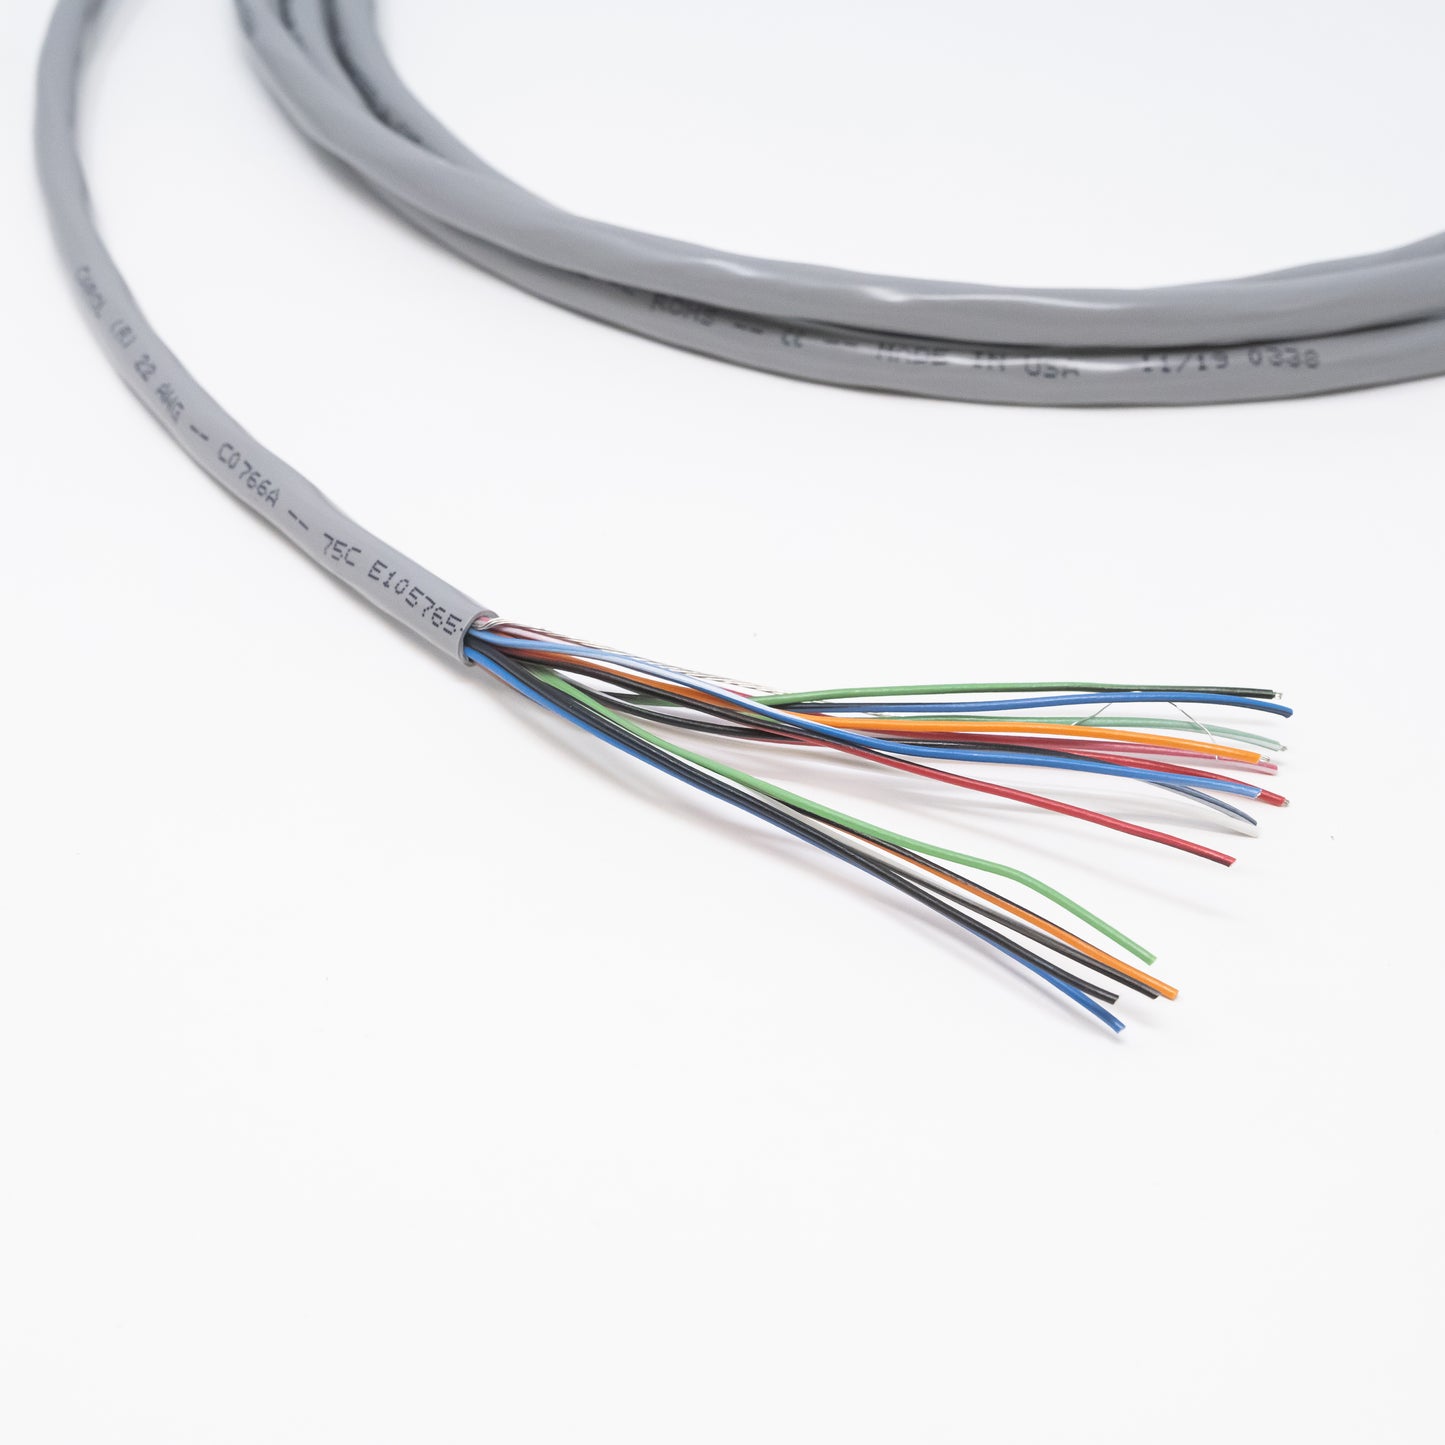 Cable with bare leads on end